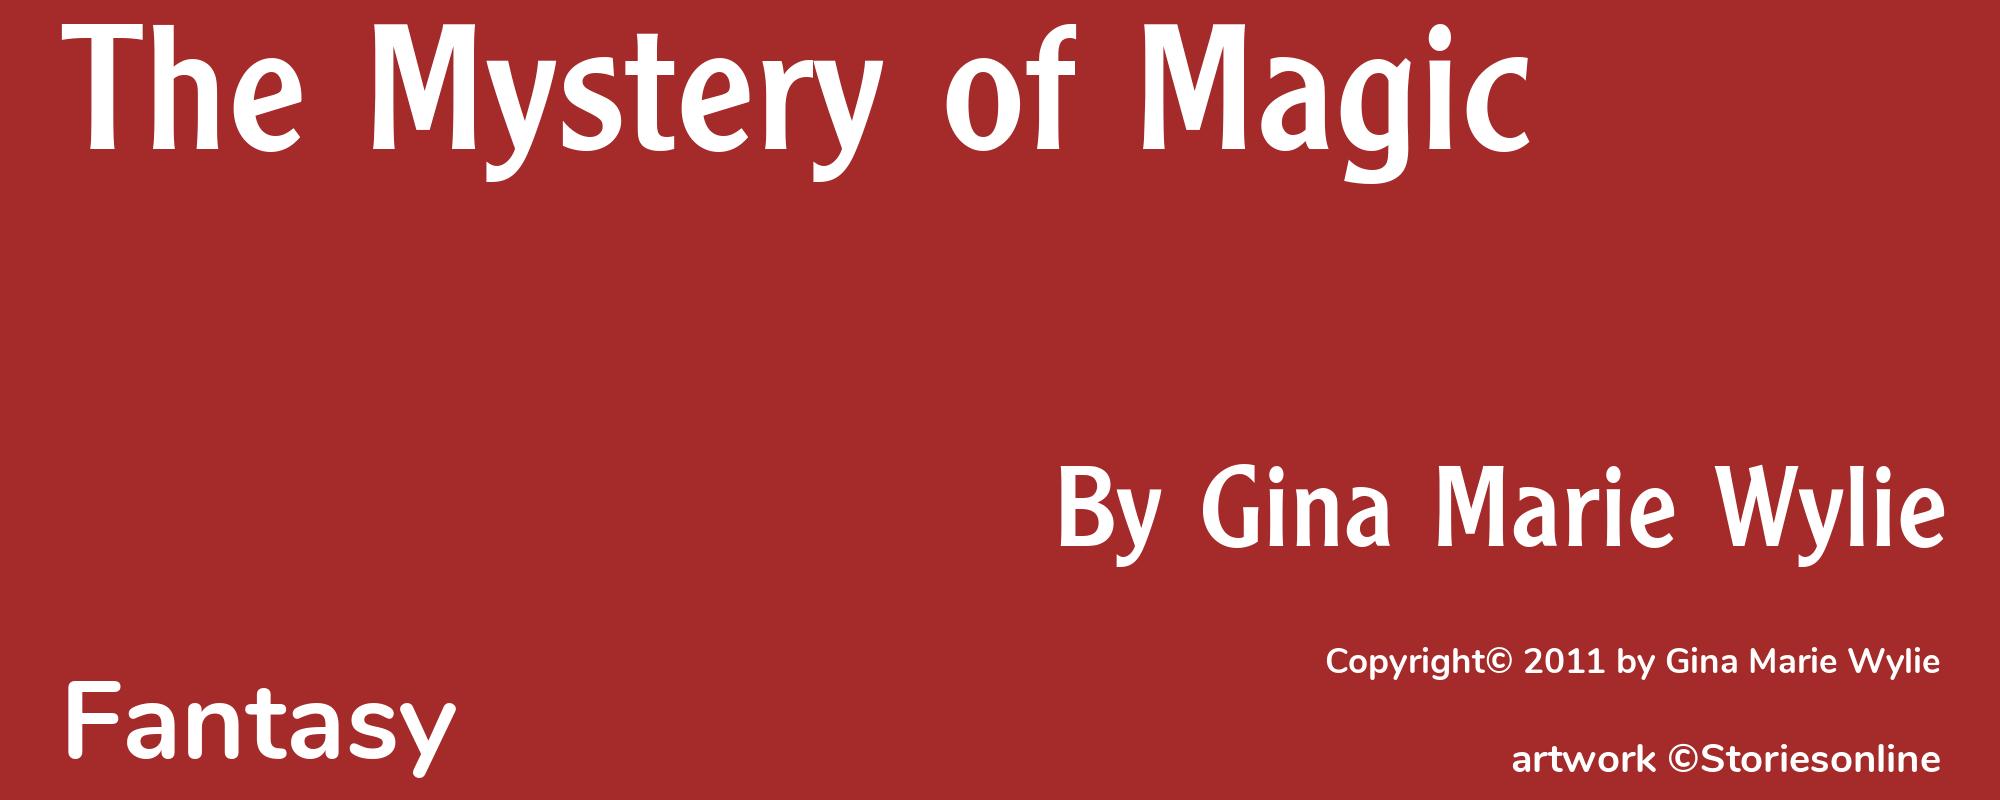 The Mystery of Magic - Cover